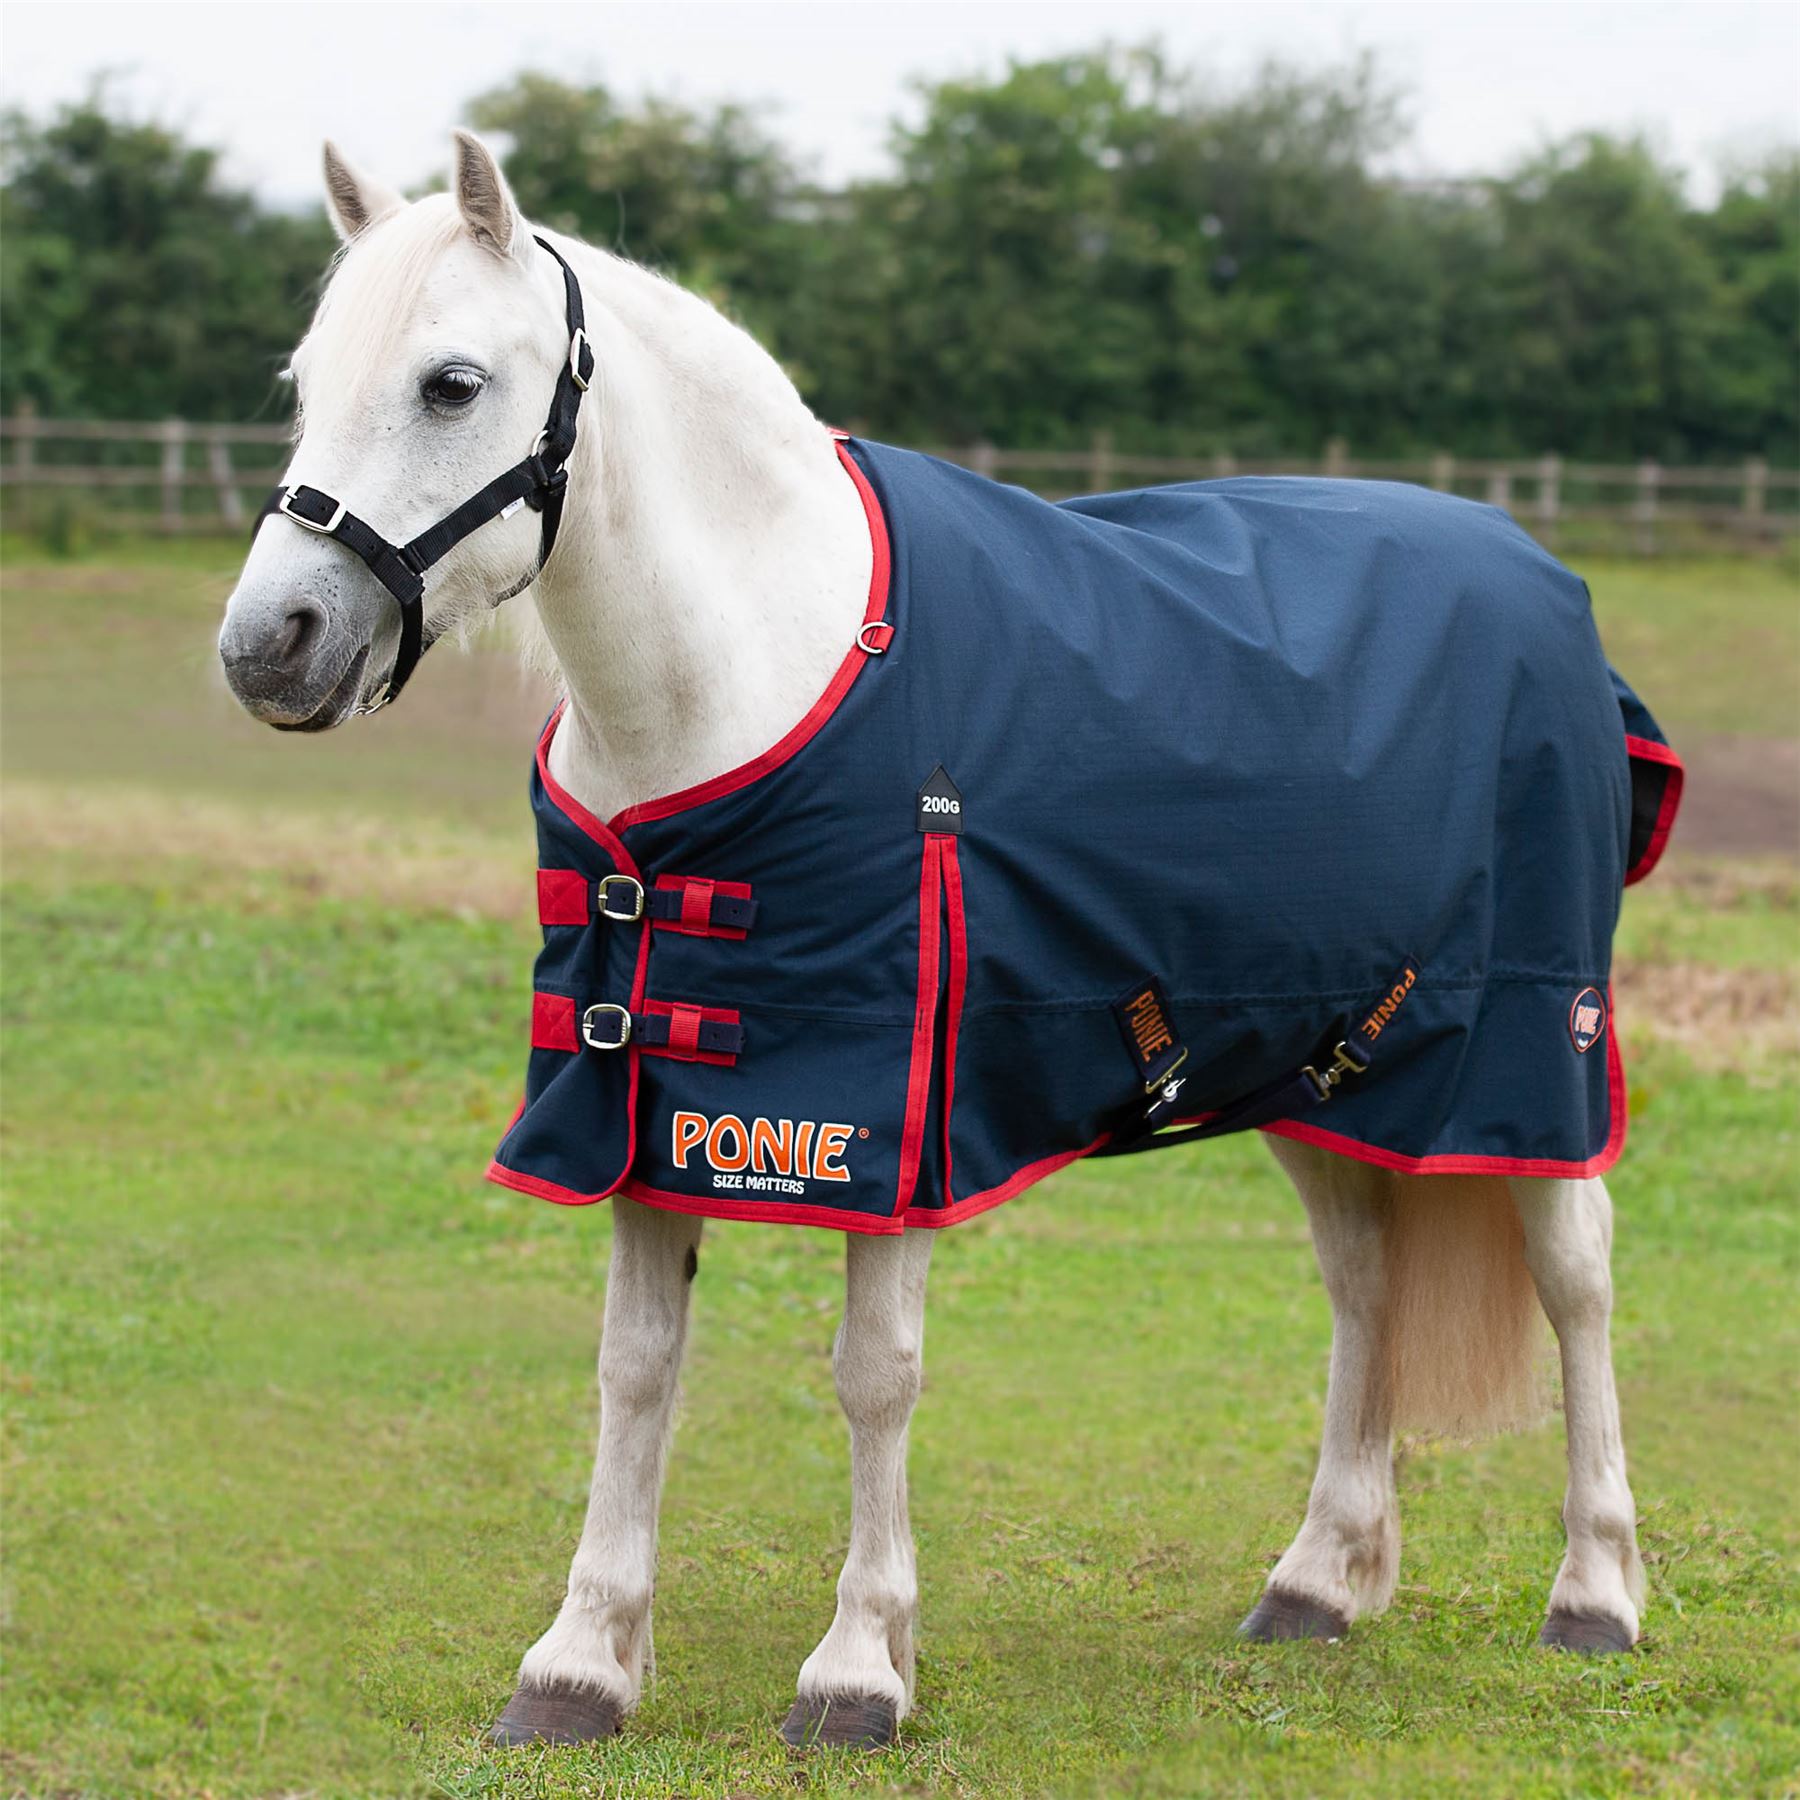 Gallop Equestrian Ponie 200 Standard Turnout Rug - Just Horse Riders